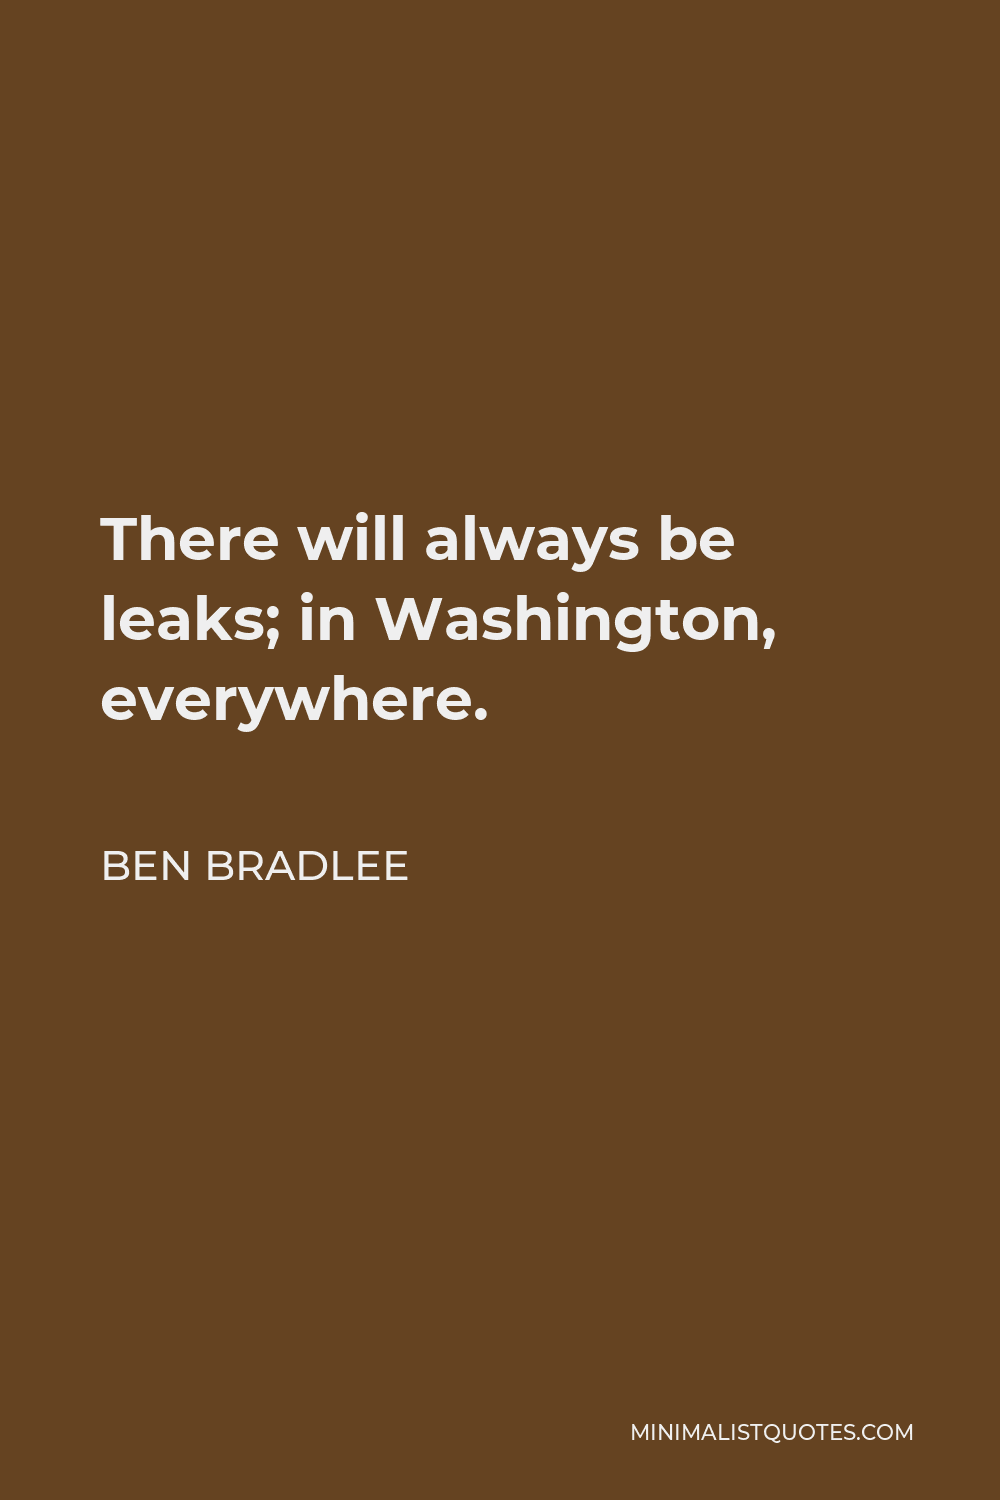 Ben Bradlee Quote - There will always be leaks; in Washington, everywhere.